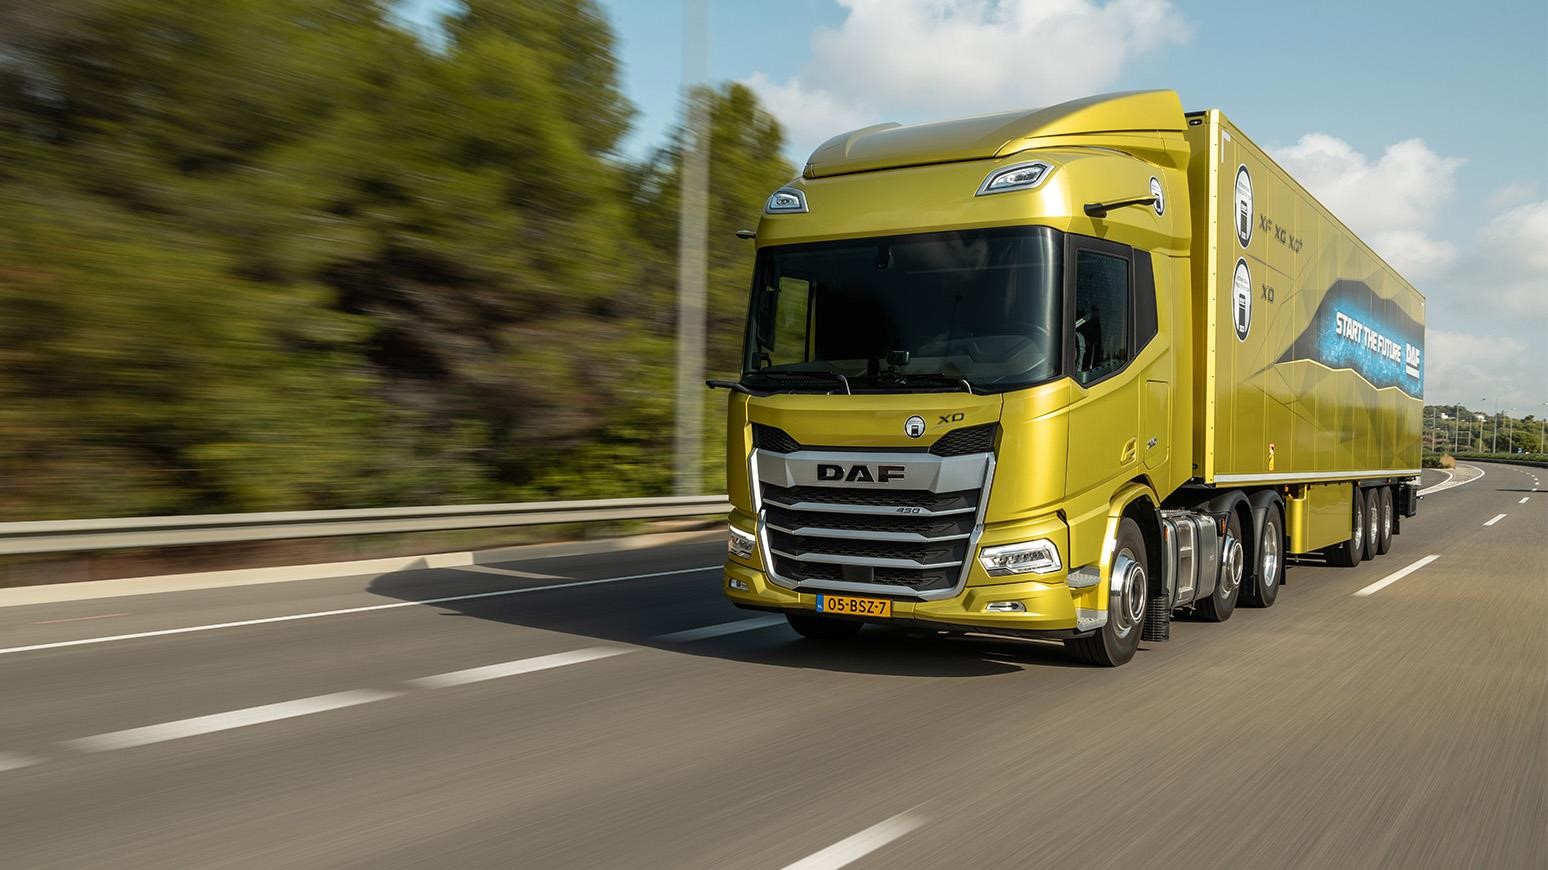 New Daf Steered Pusher Axle For Even Greater Efficiency